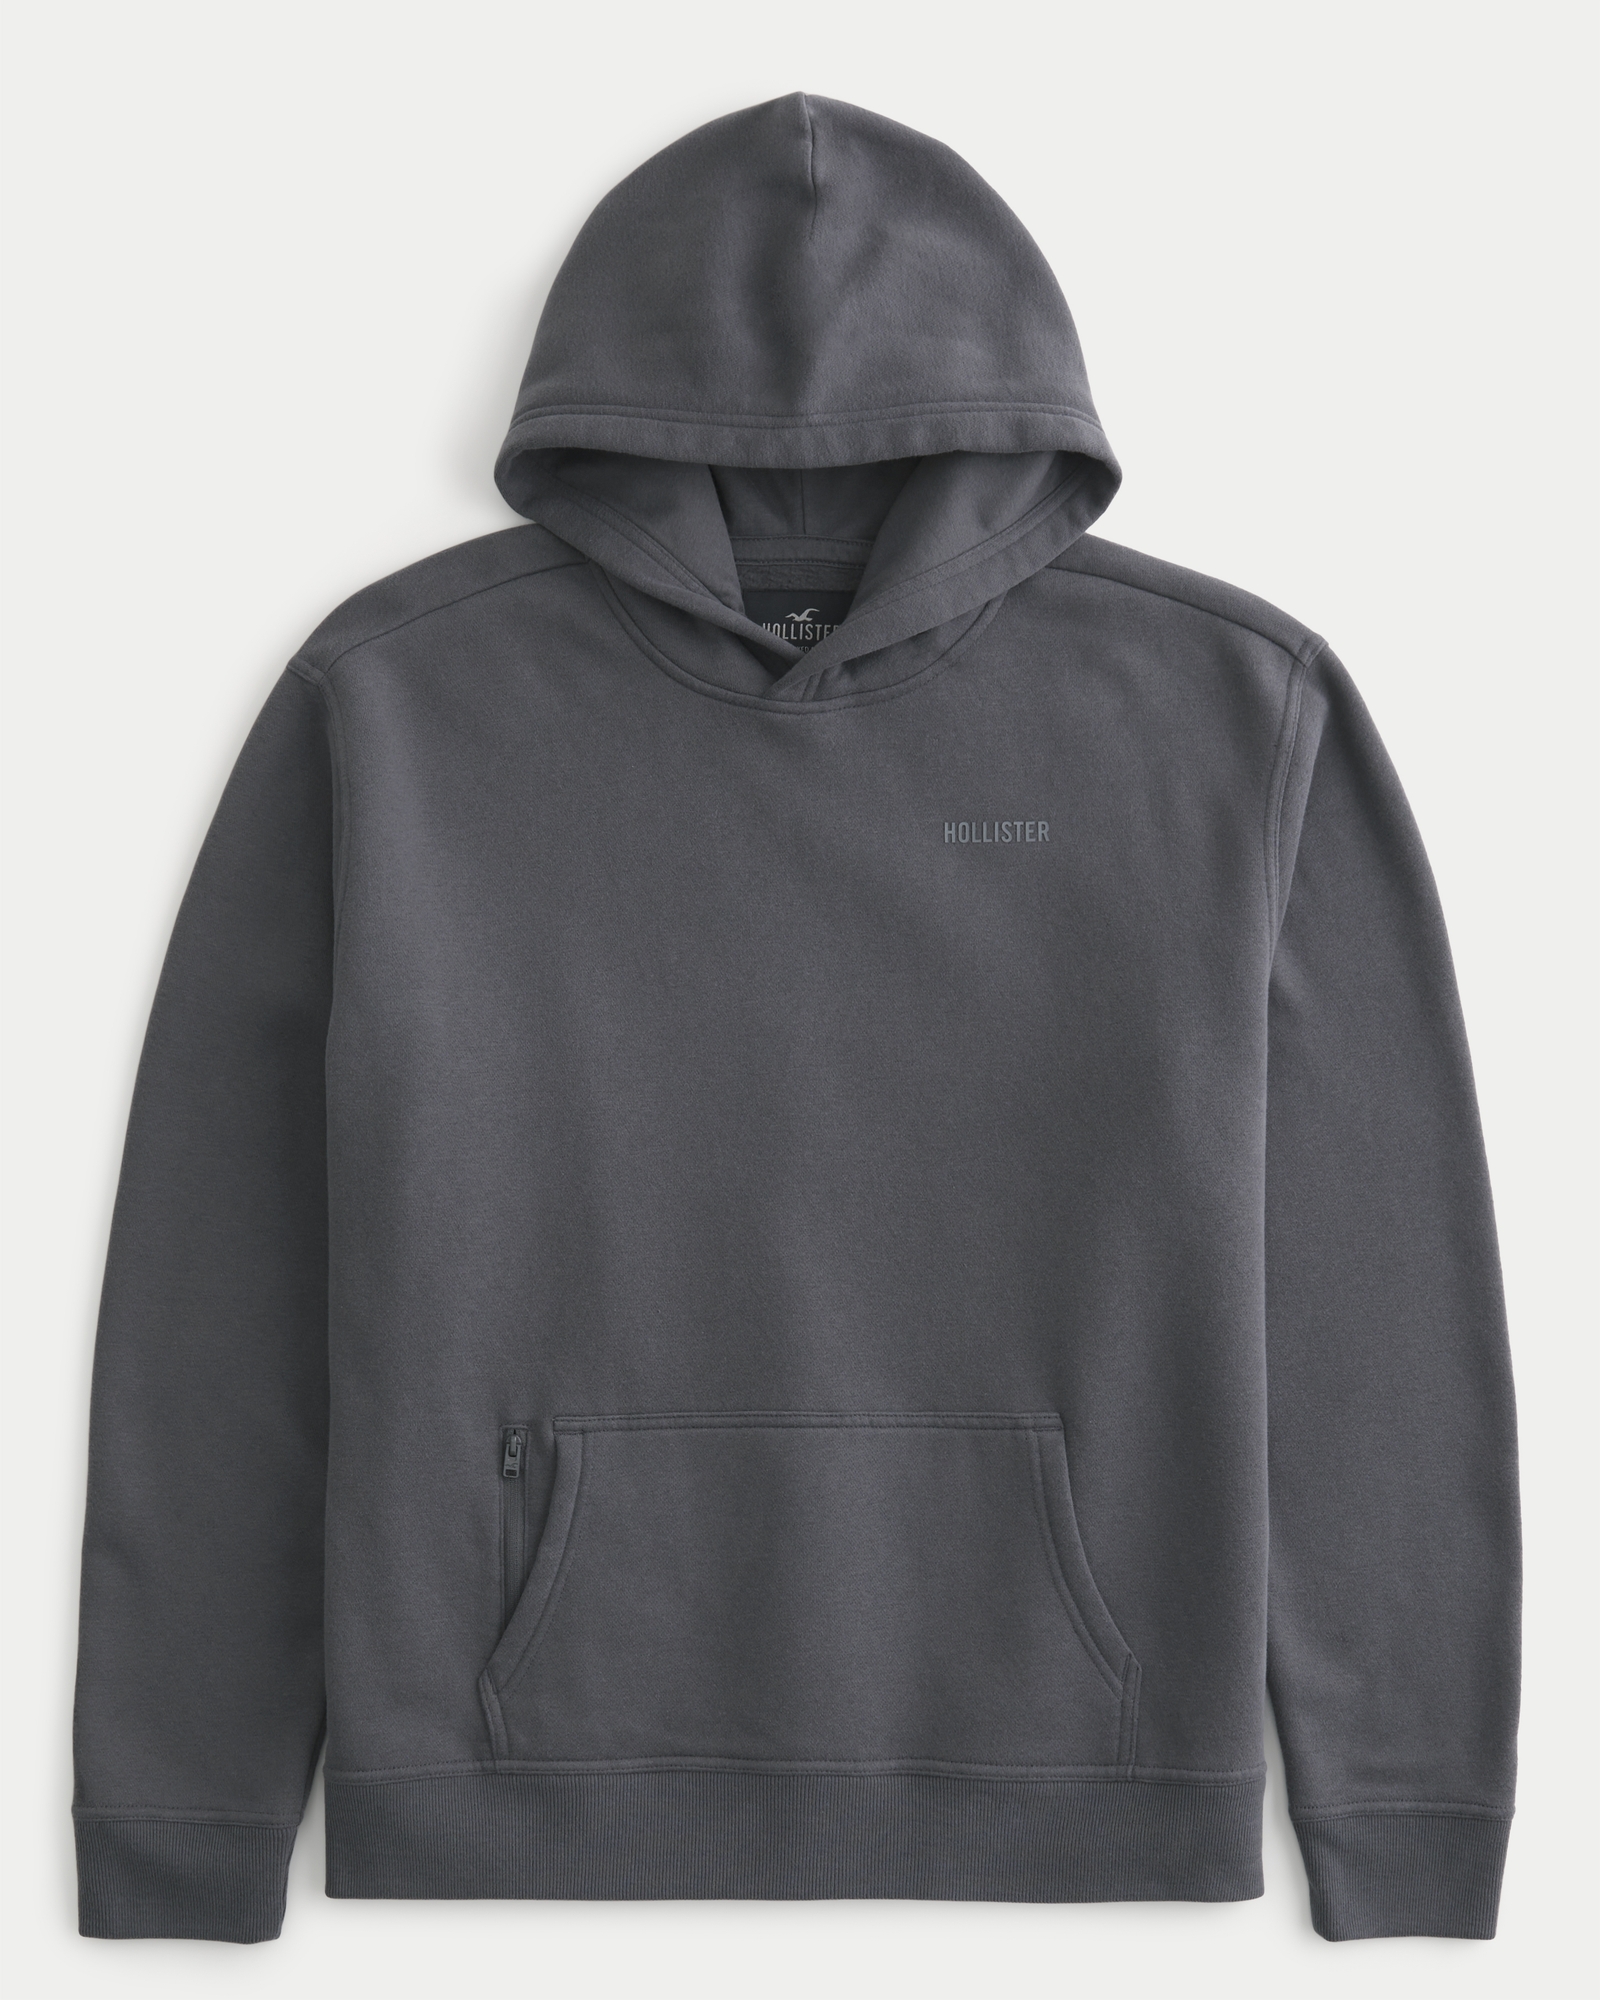 https://img.hollisterco.com/is/image/anf/KIC_322-3160-1677-120_prod1.jpg?policy=product-extra-large